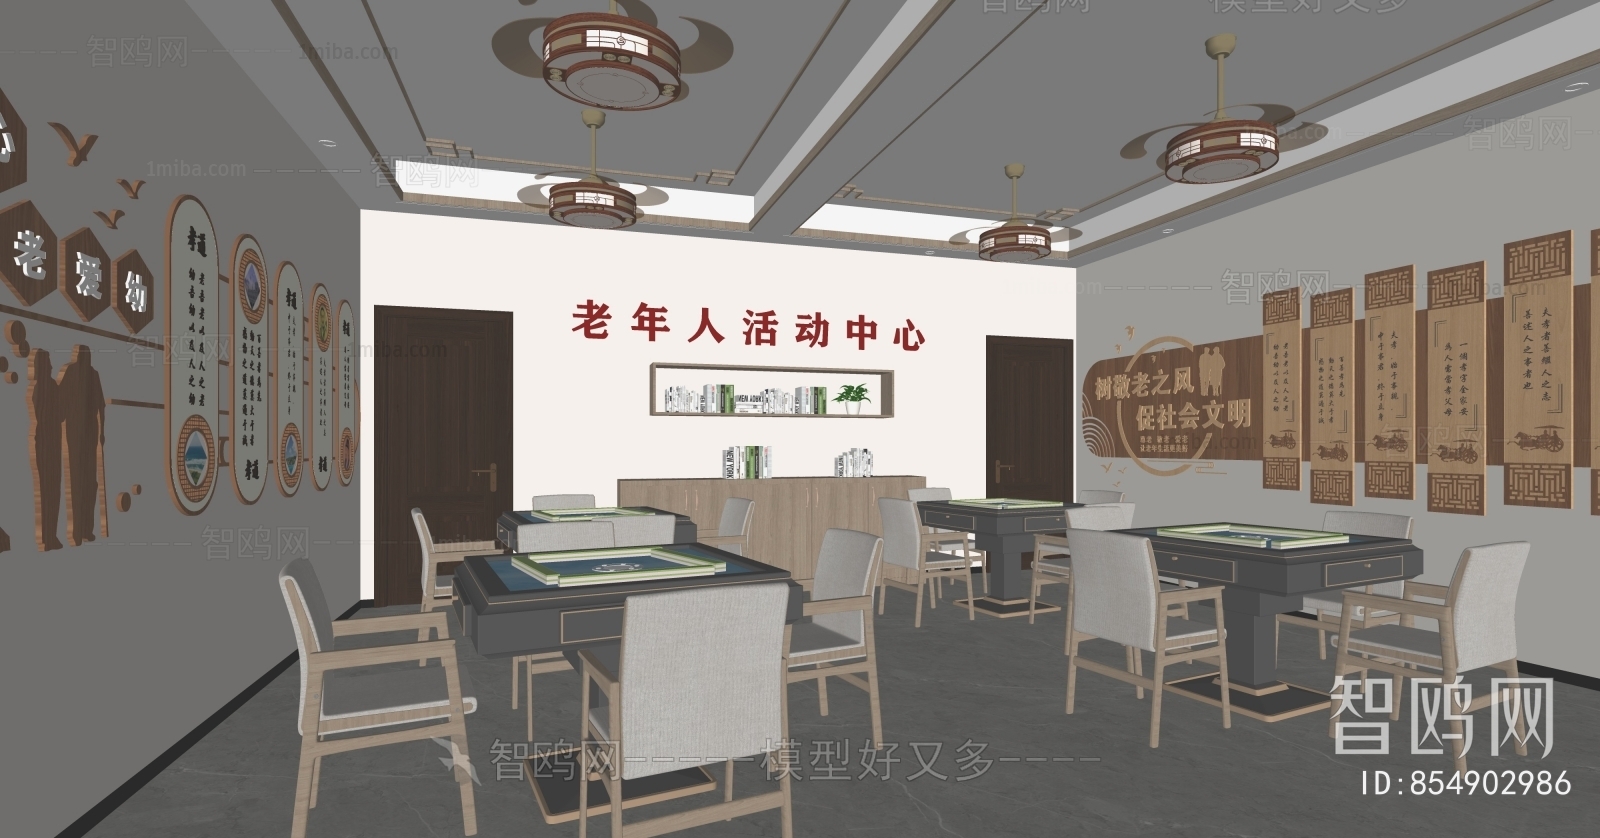 New Chinese Style Community Activity Center